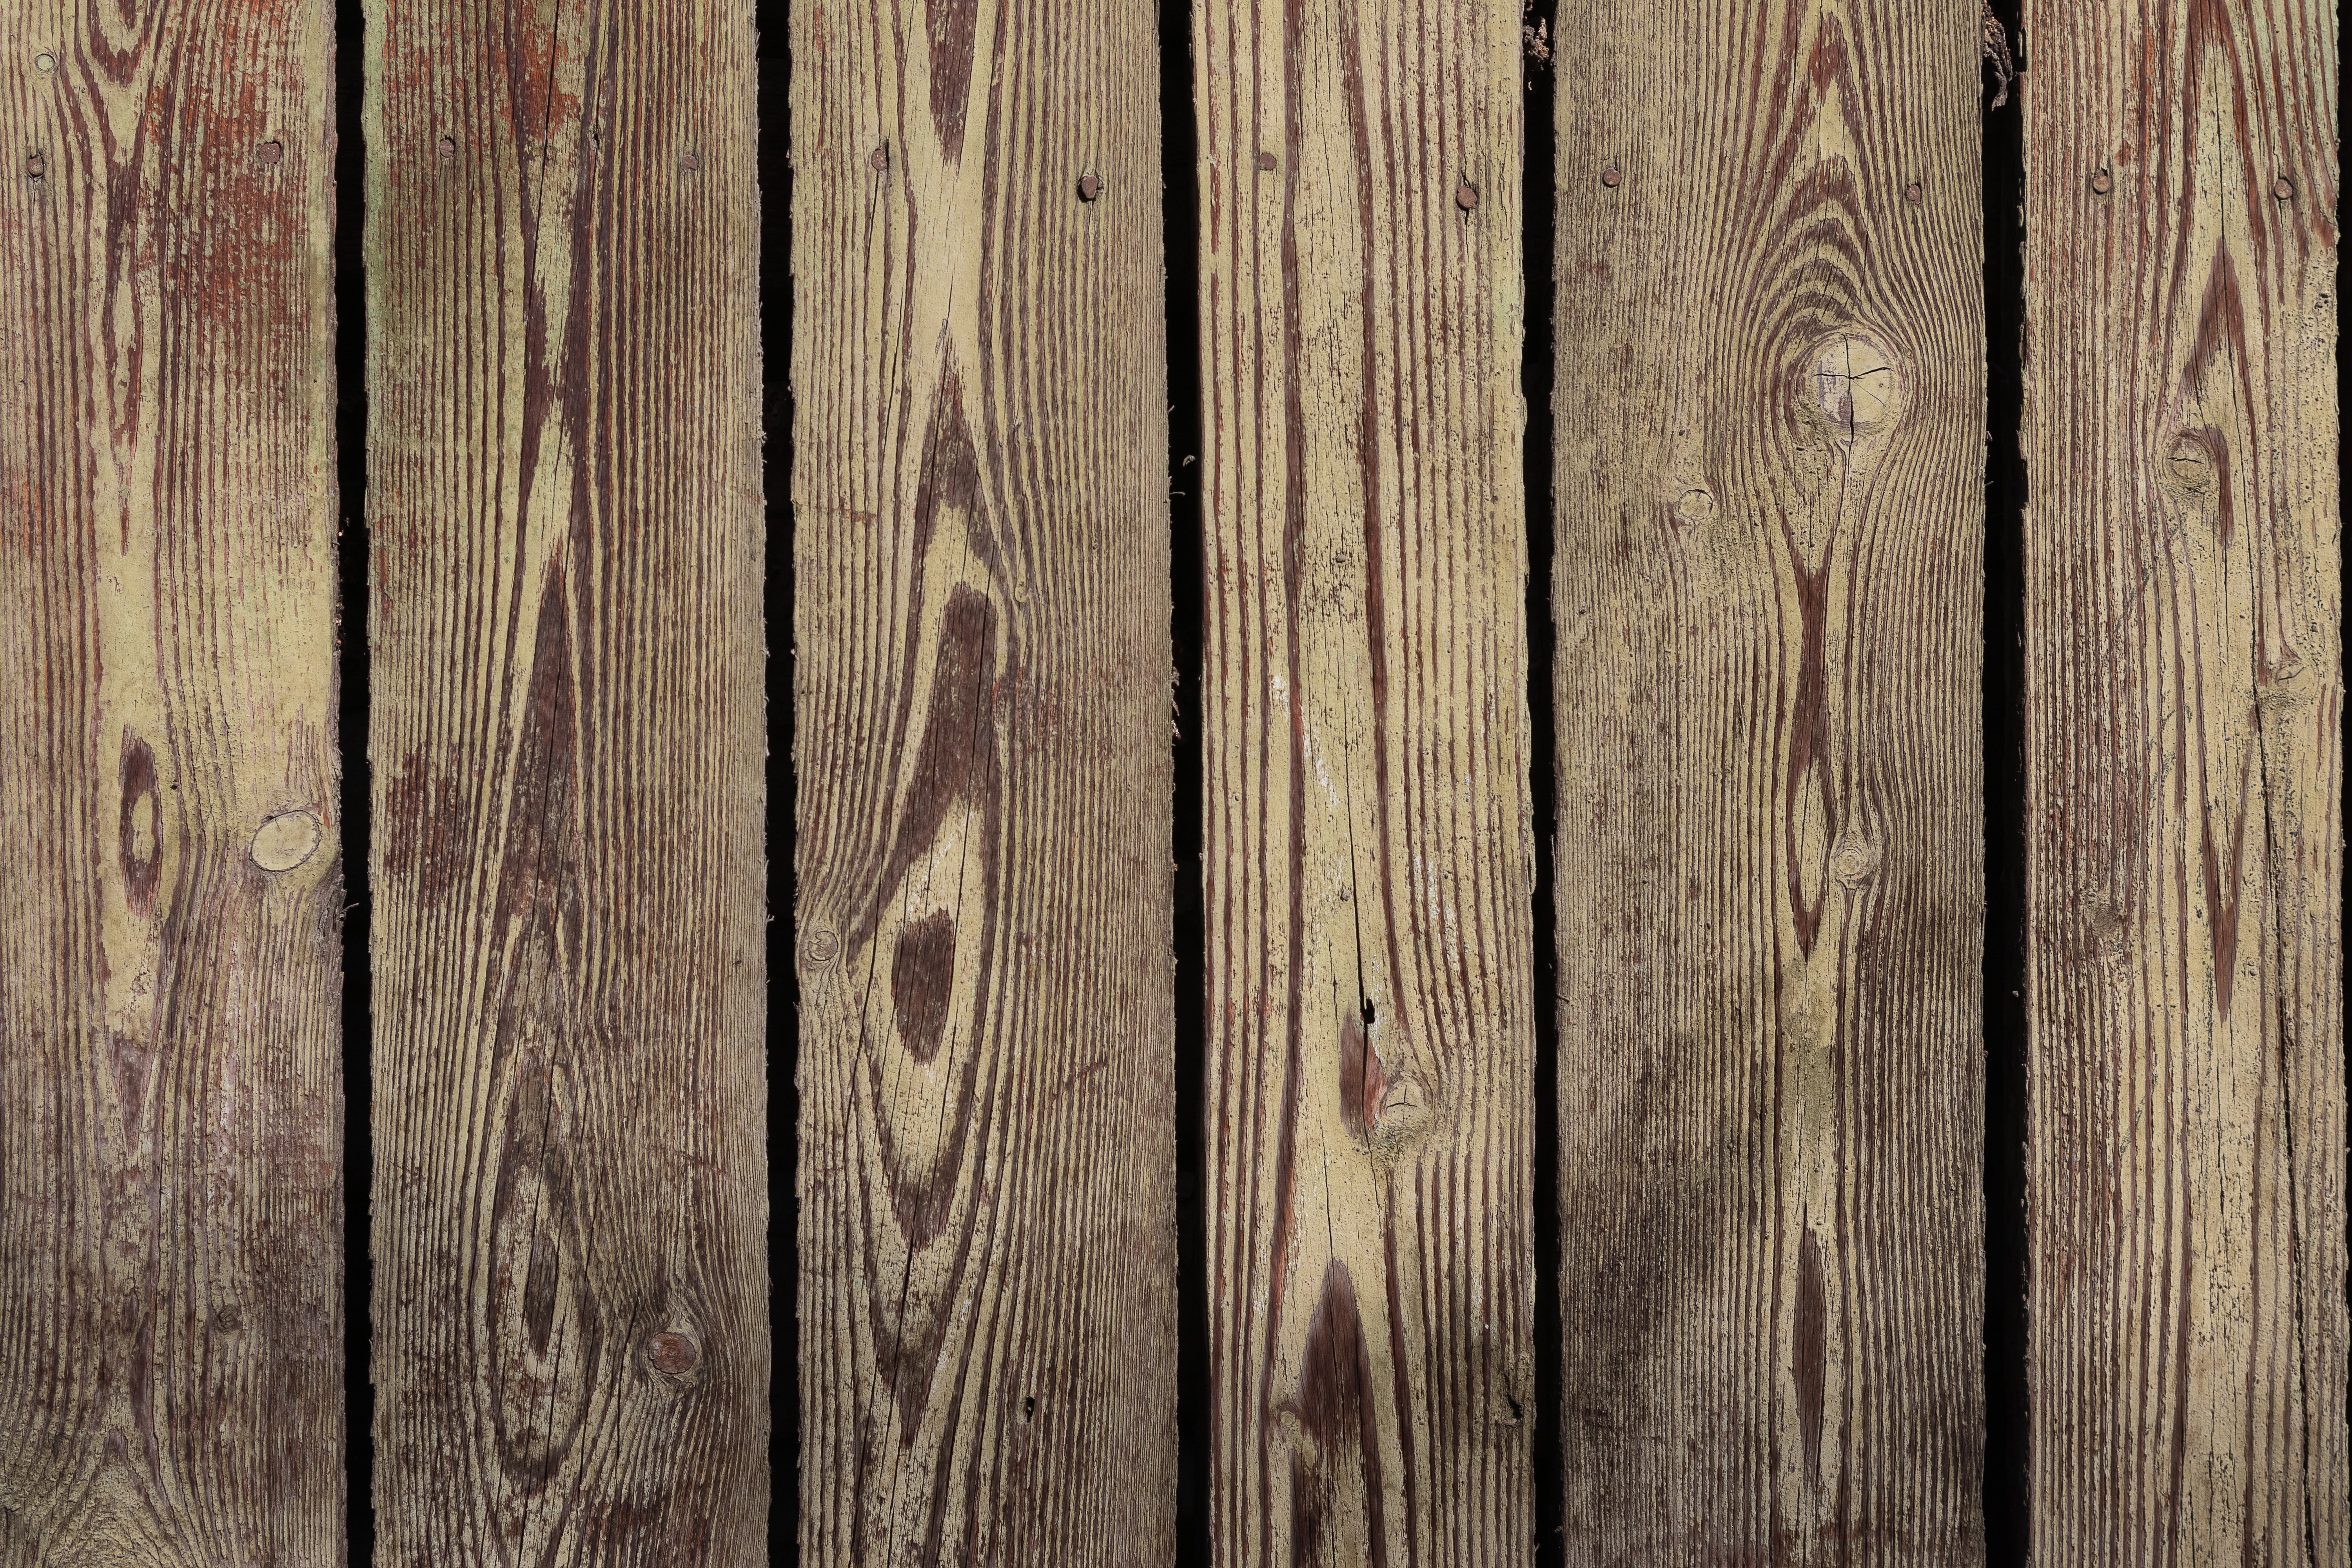 wood, wooden, texture, textures, surface, planks, board